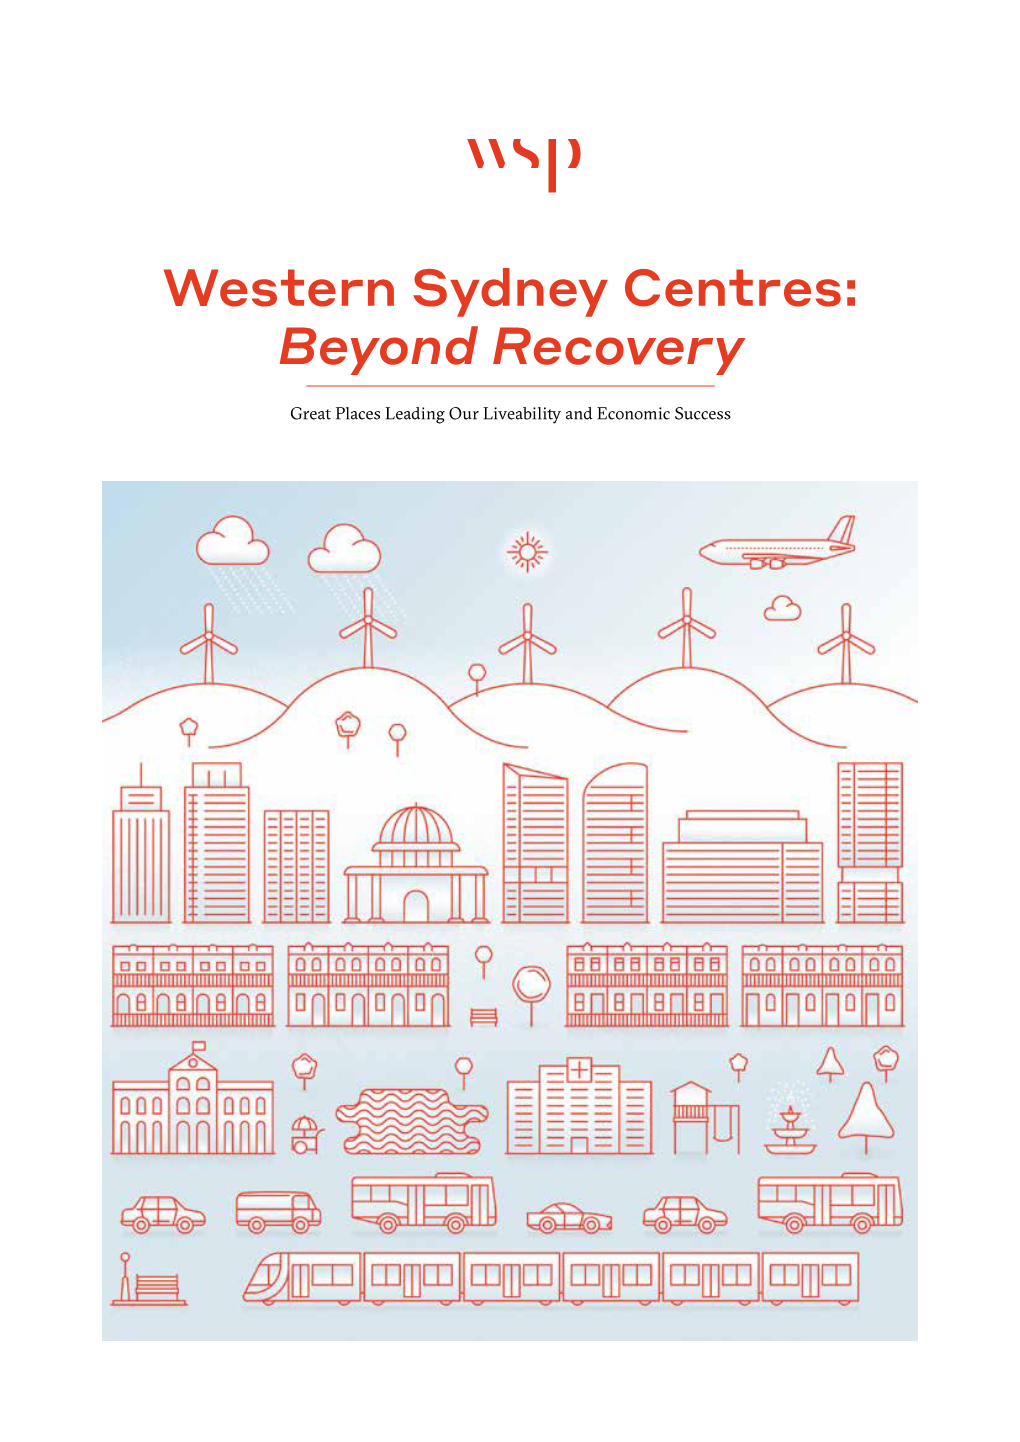 Western Sydney Centres: Beyond Recovery